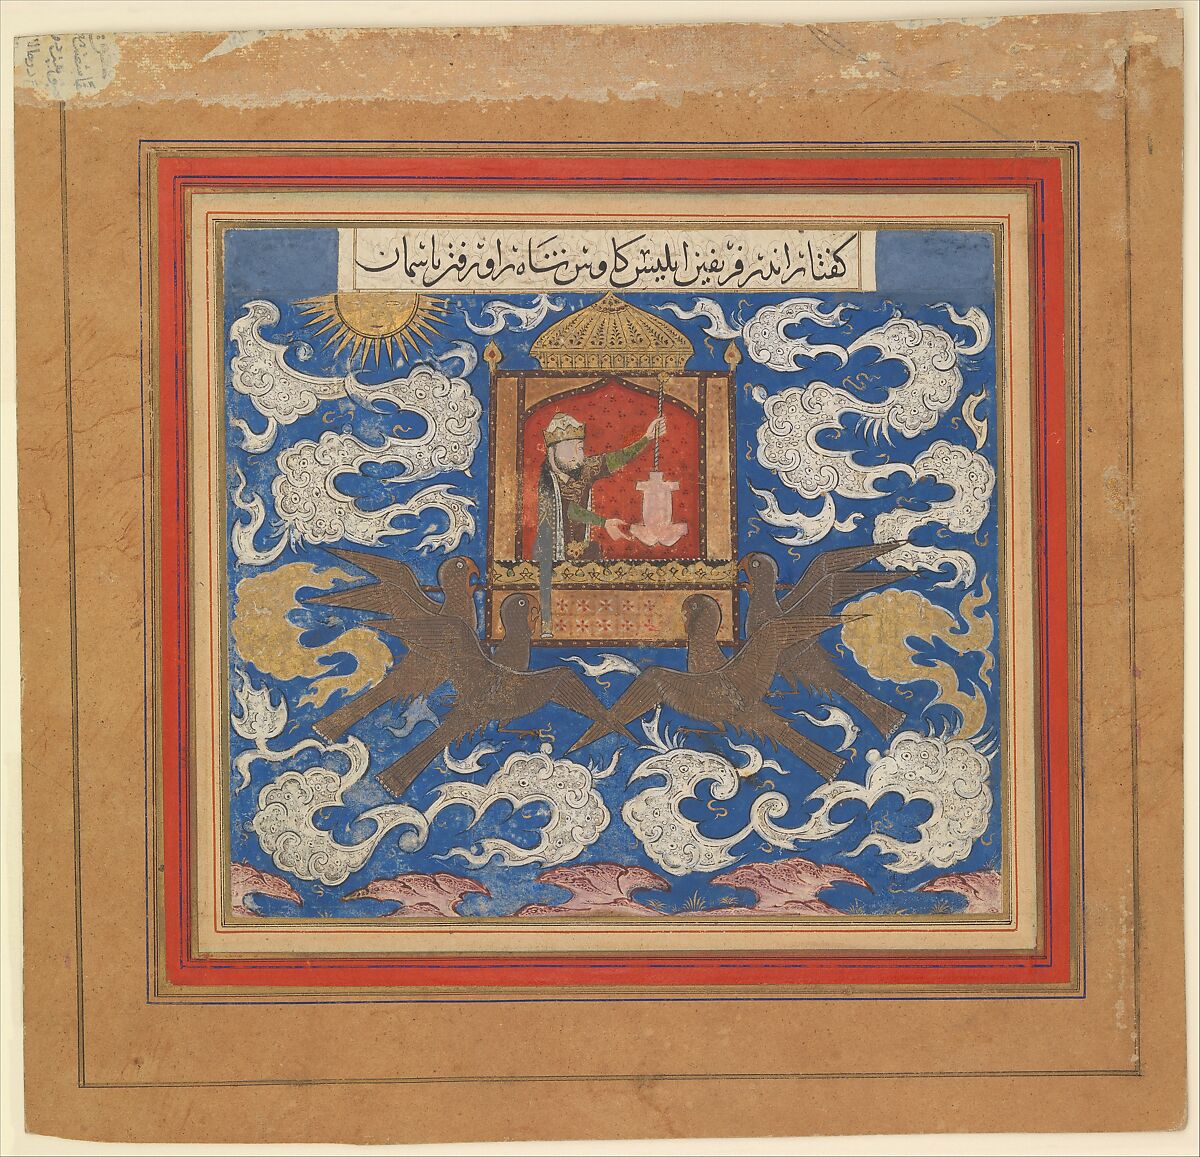 "Kai Kavus Attempts to Fly to Heaven", Folio from a Shahnama (Book of Kings), Abu'l Qasim Firdausi  Iranian, Image: Ink, opaque watercolor, and gold on paper<br/>Margins: Ink and gold on dyed paper